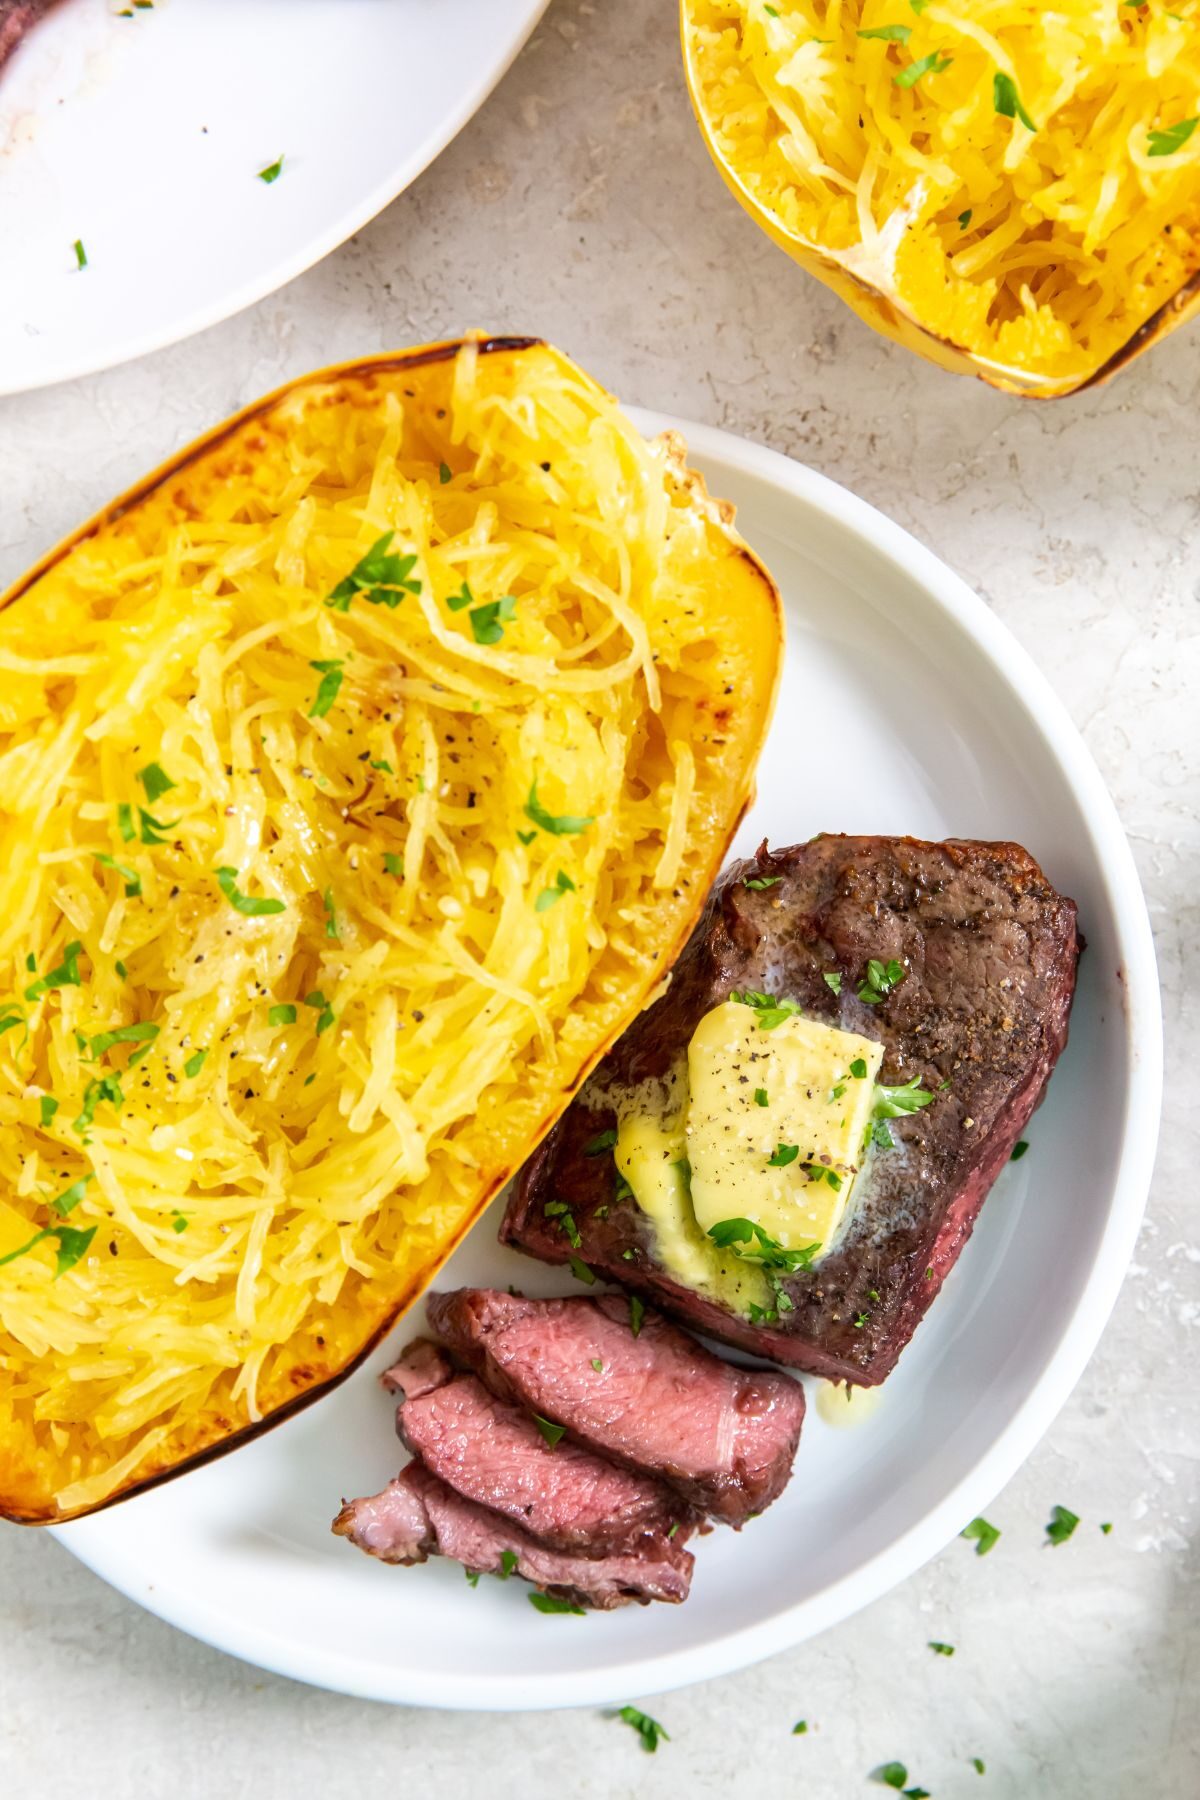 One cooked and sliced petite sirloin steak topped with butter and herbs next to a halved and cooked spaghetti squash on a white plate.